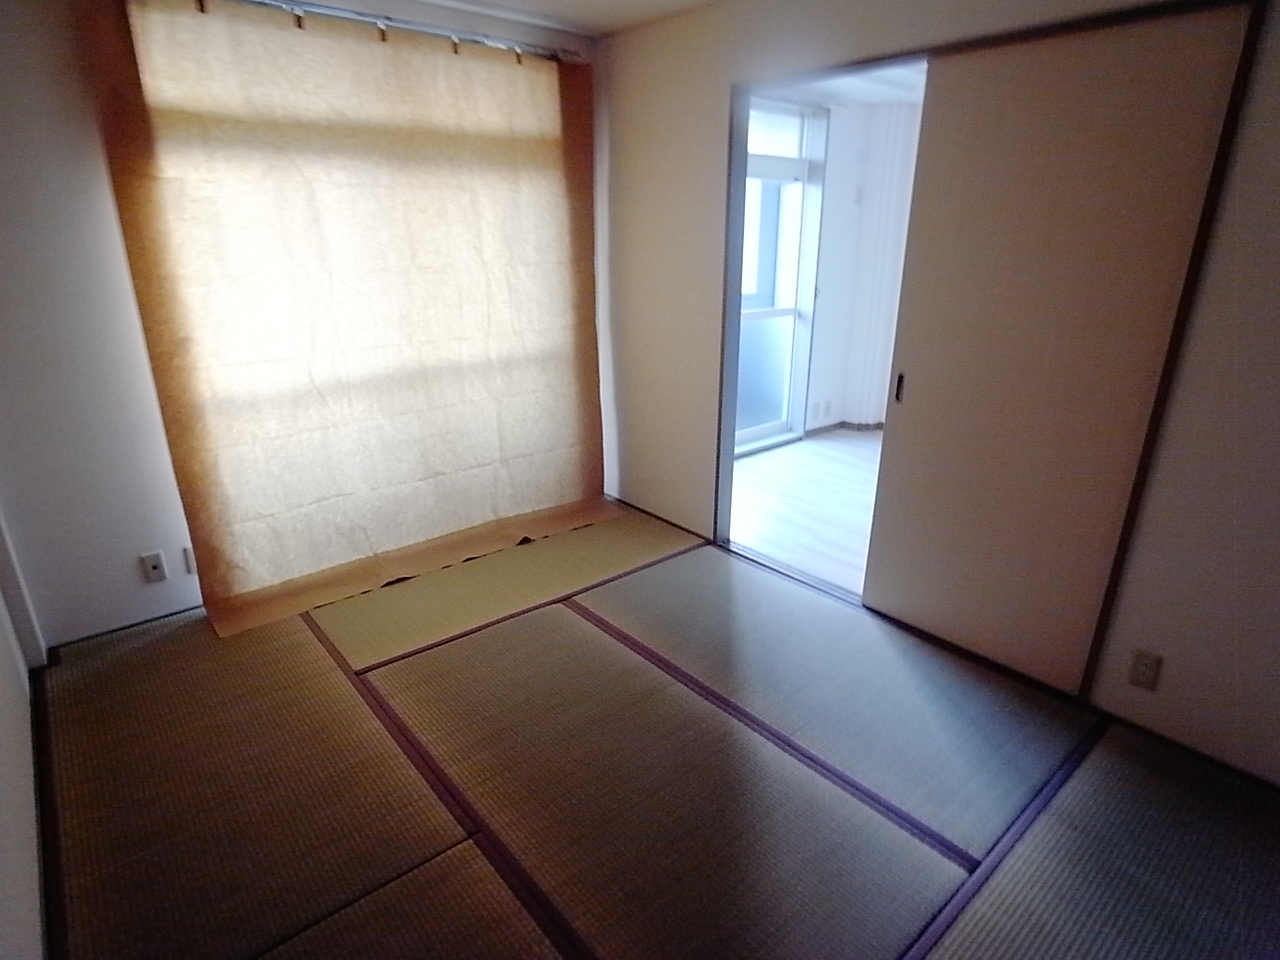 Living and room. The south side of the Japanese-style room 6 quires